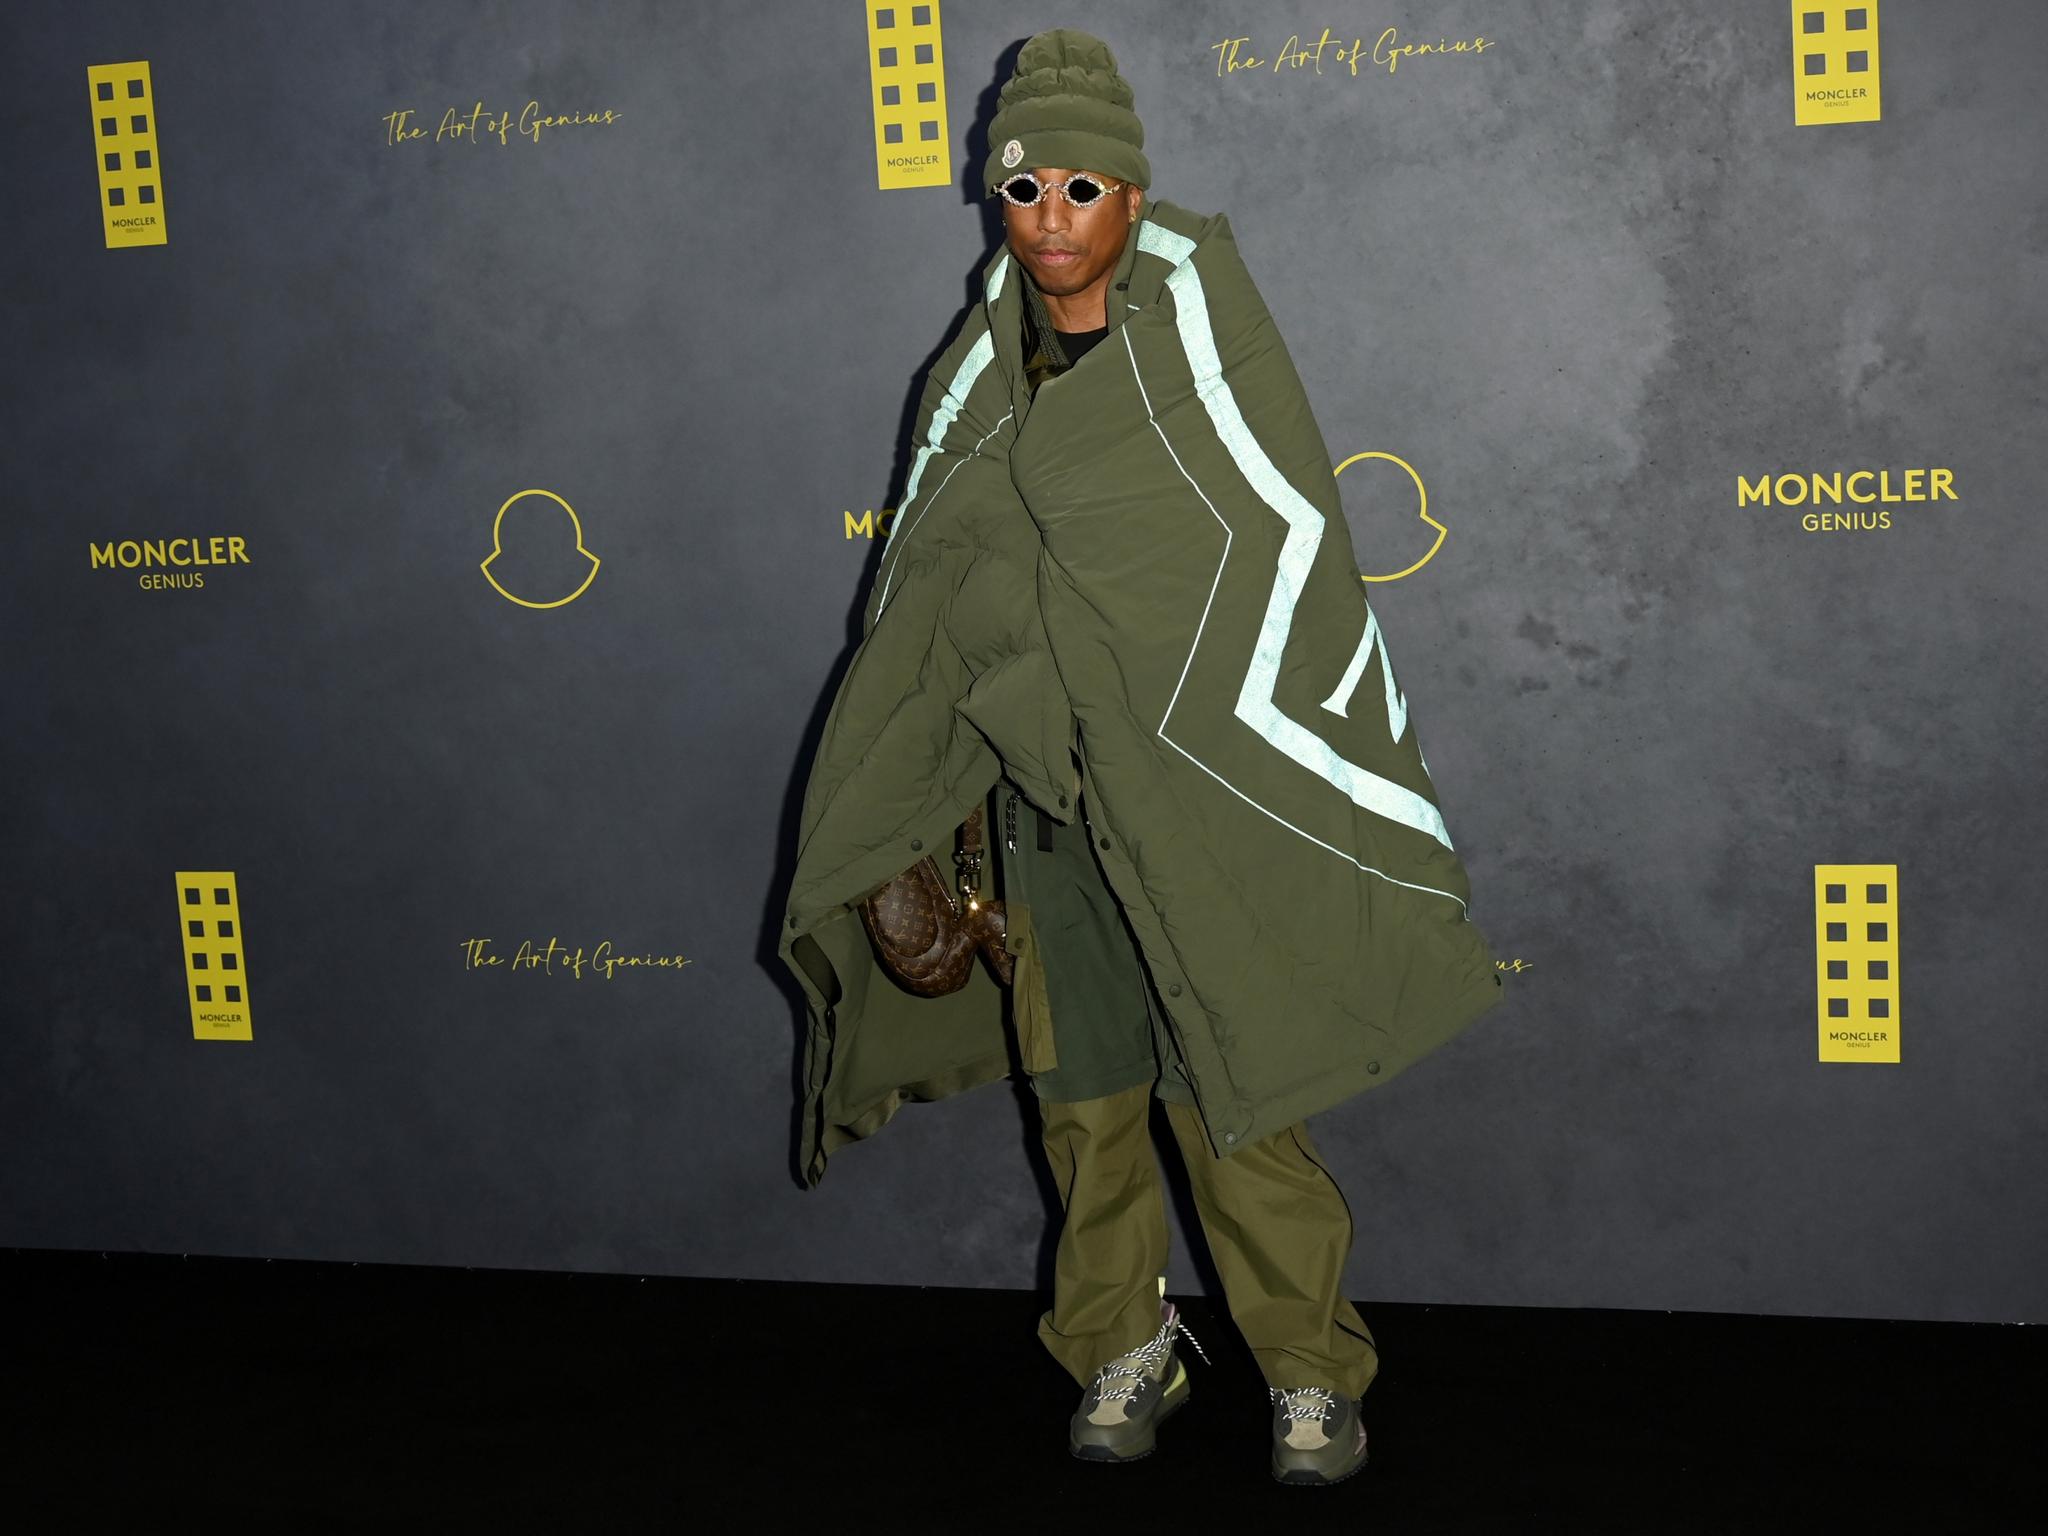 Charting the fashion history of Pharrell Williams, the new